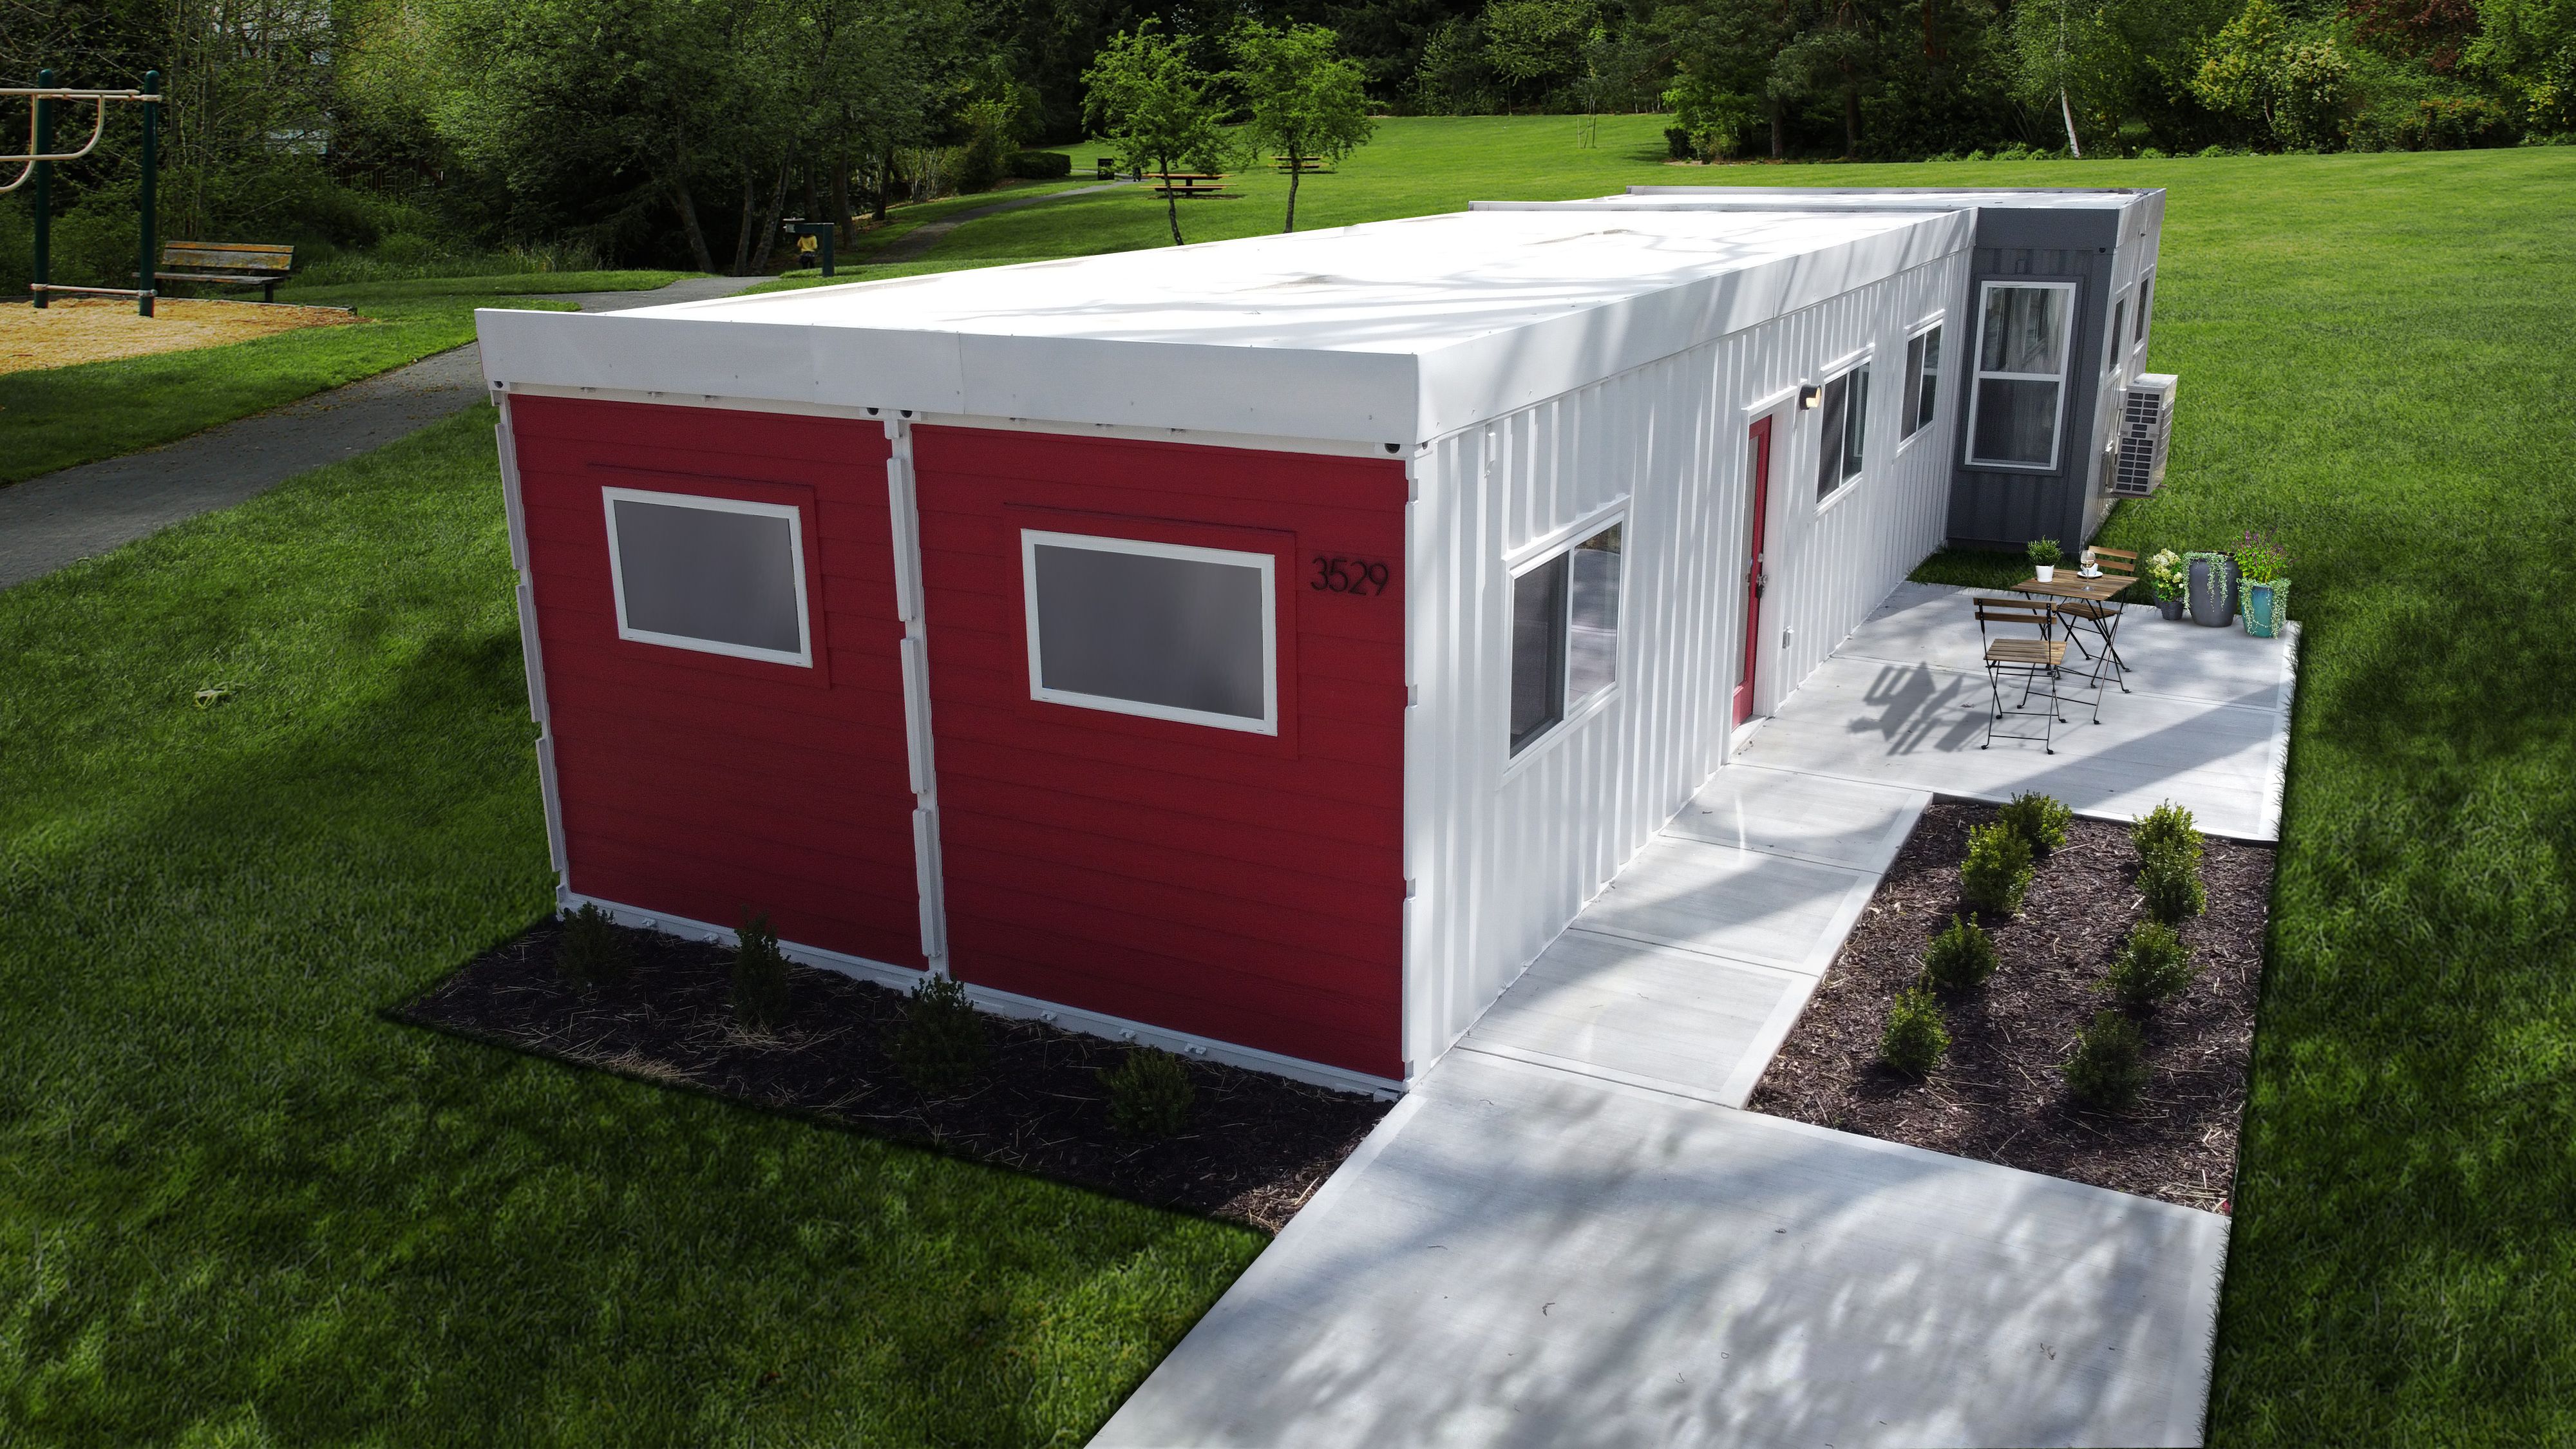 Shipping Container Tiny House You Can Build Yourself or Buy